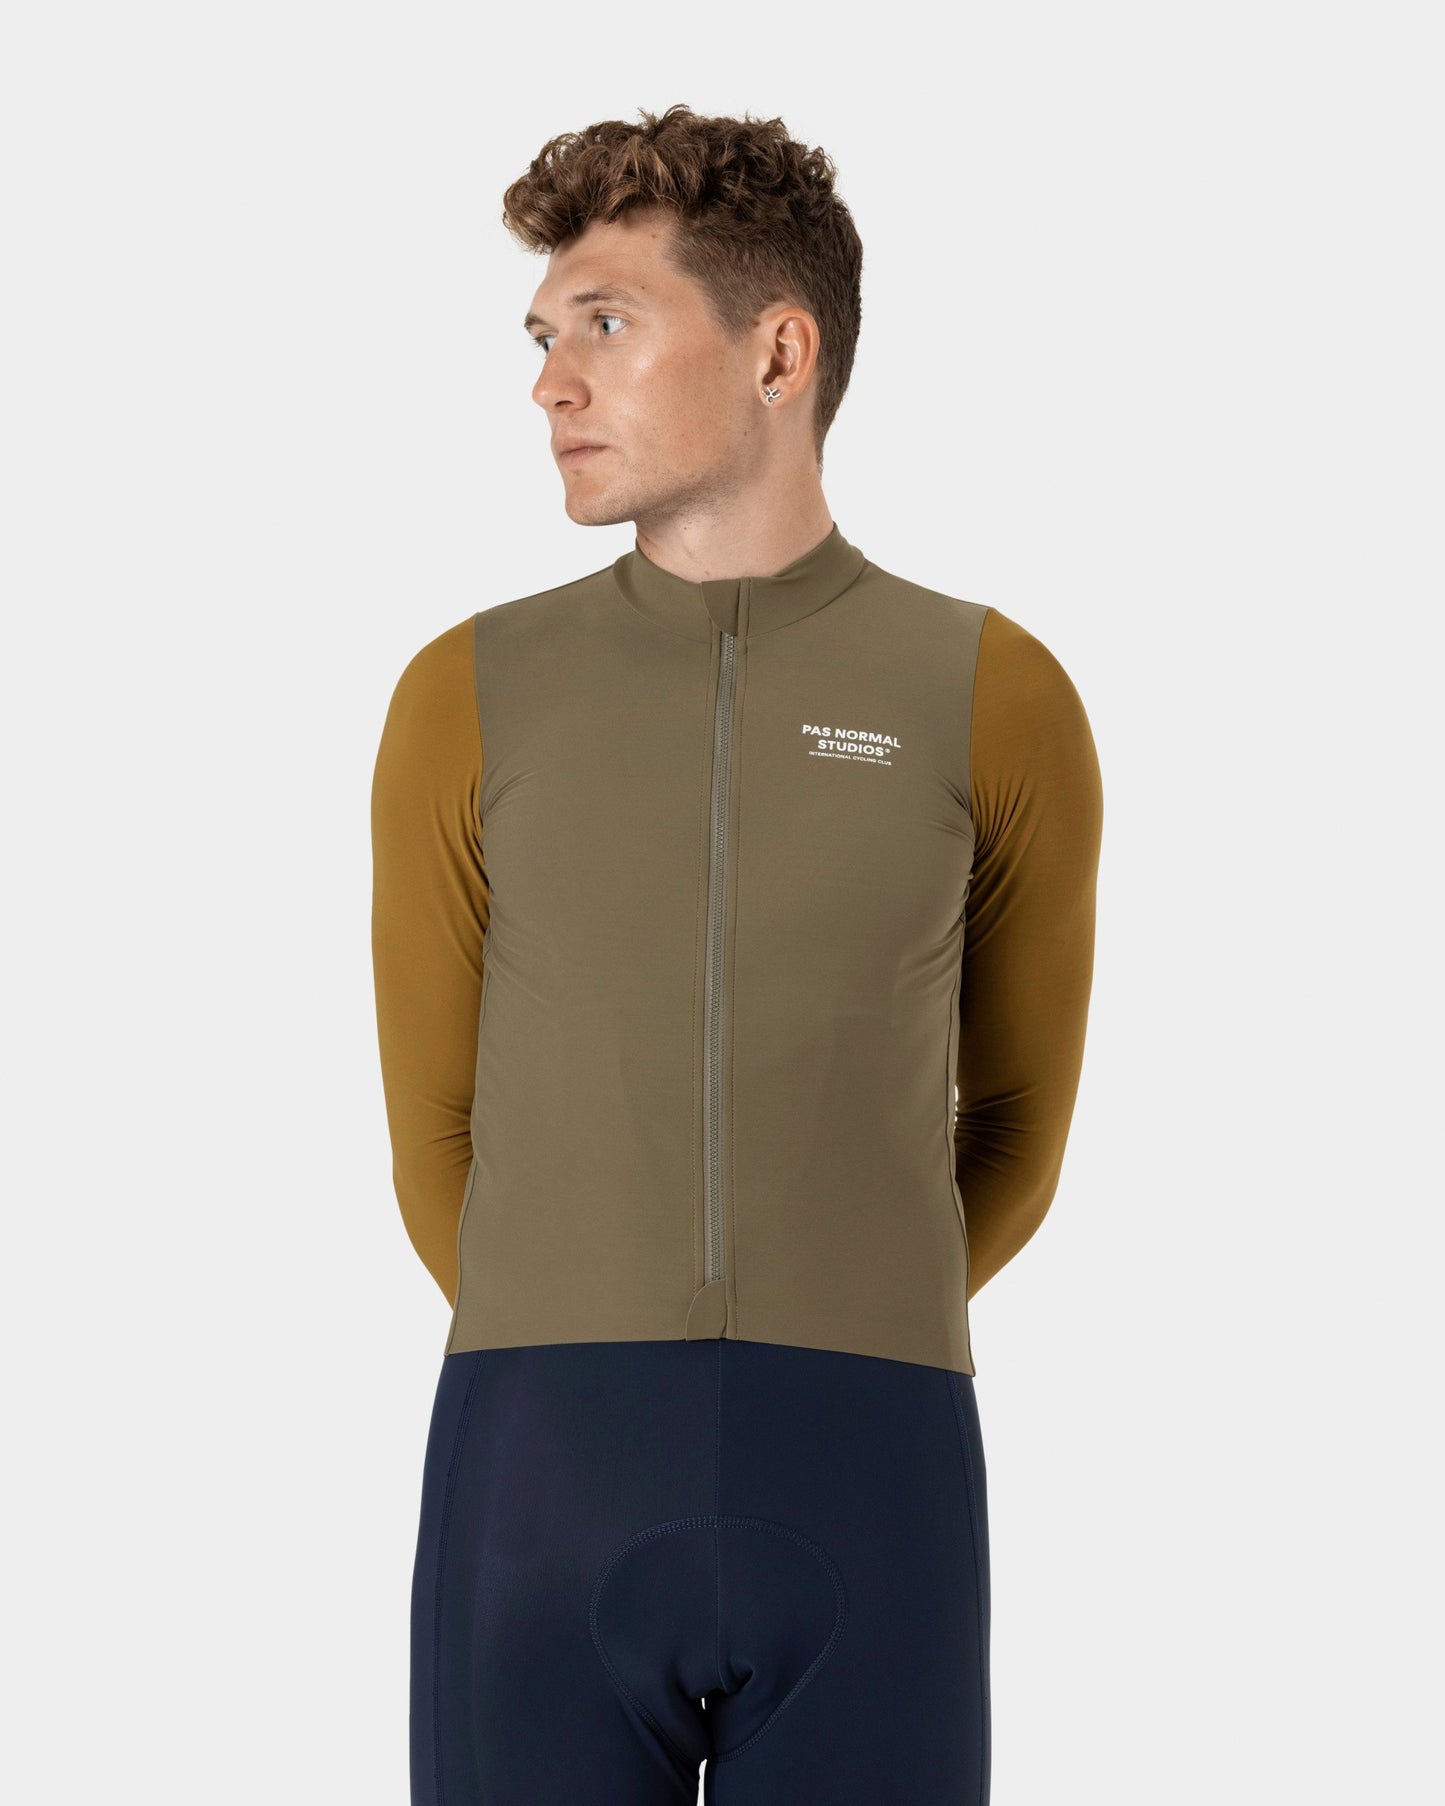 PAS NORMAL STUDIOS Mechanism Long Sleeve Jersey AW22 - Brown Olive